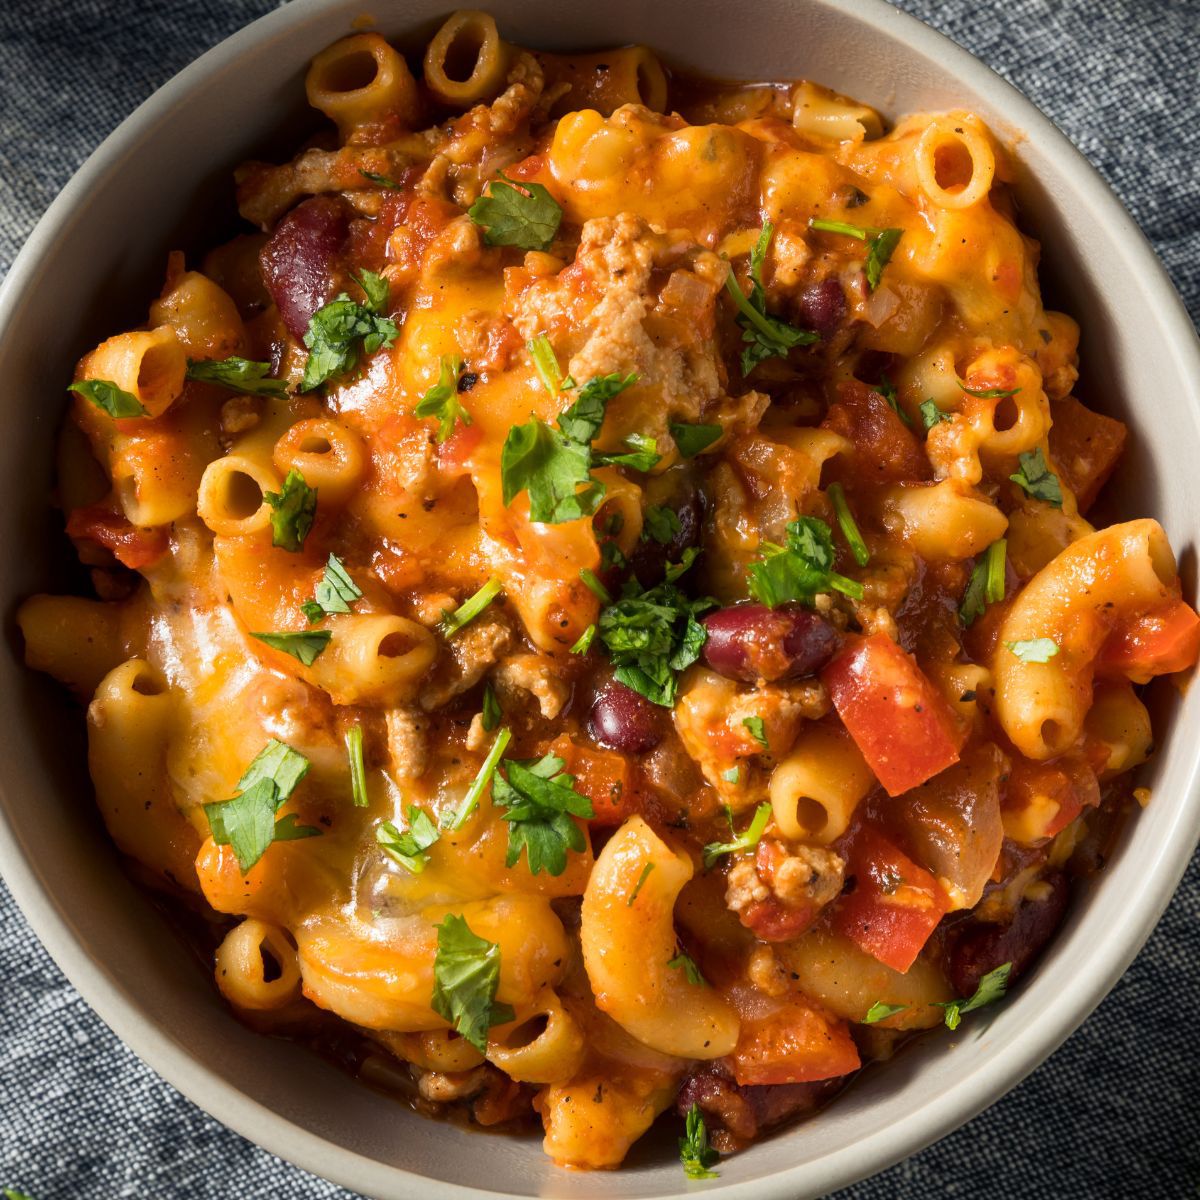 Square image of chili mac in a bowl.